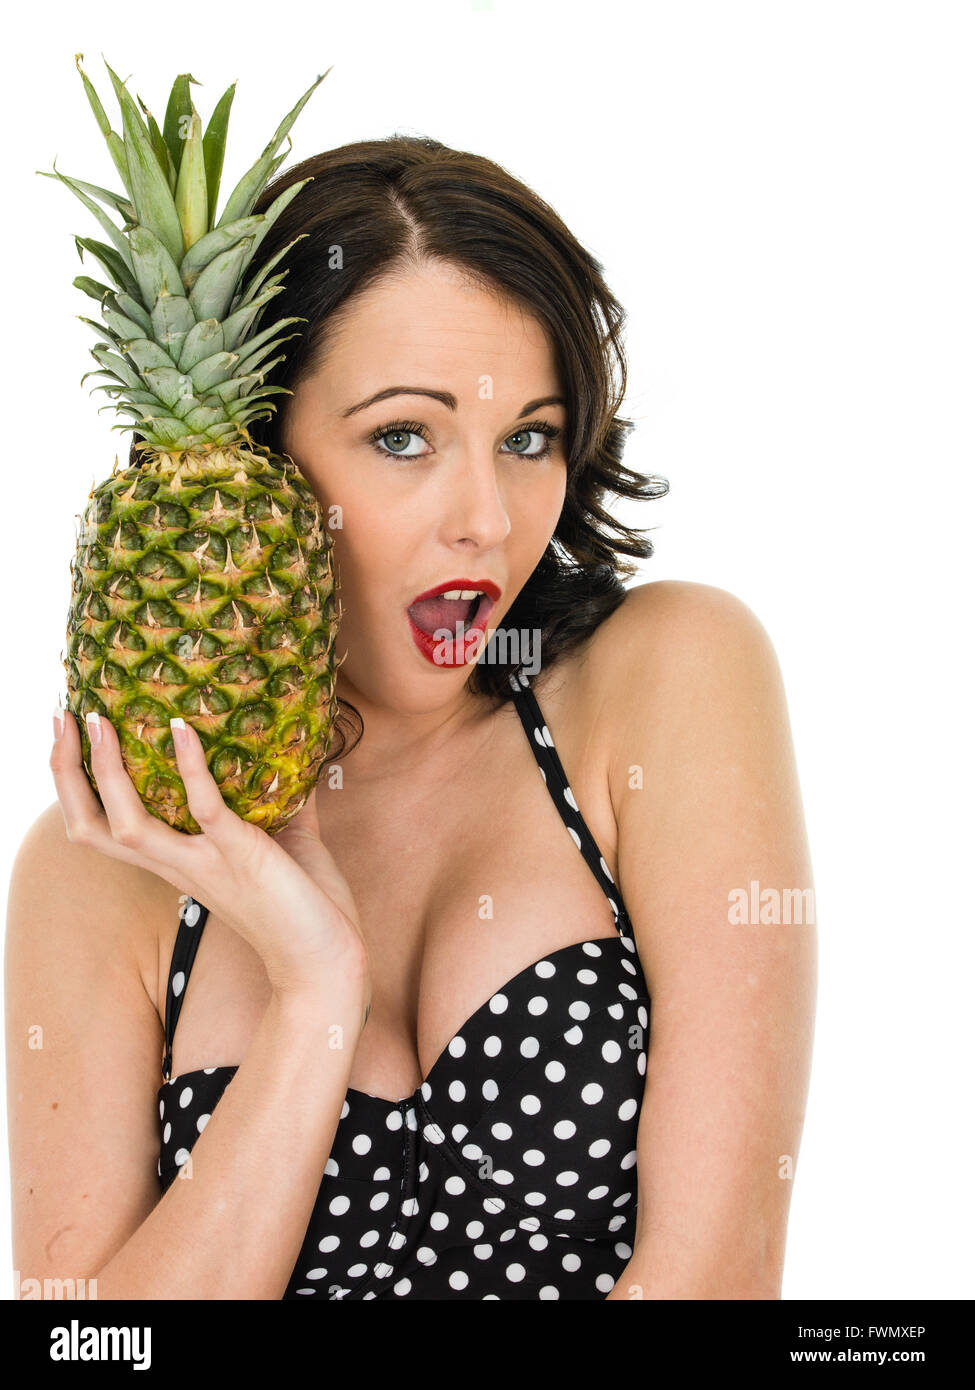 Healthy Attractive Young Woman Holding A Fresh Ripe Pineapple Isolated Against a White Background Stock Photo